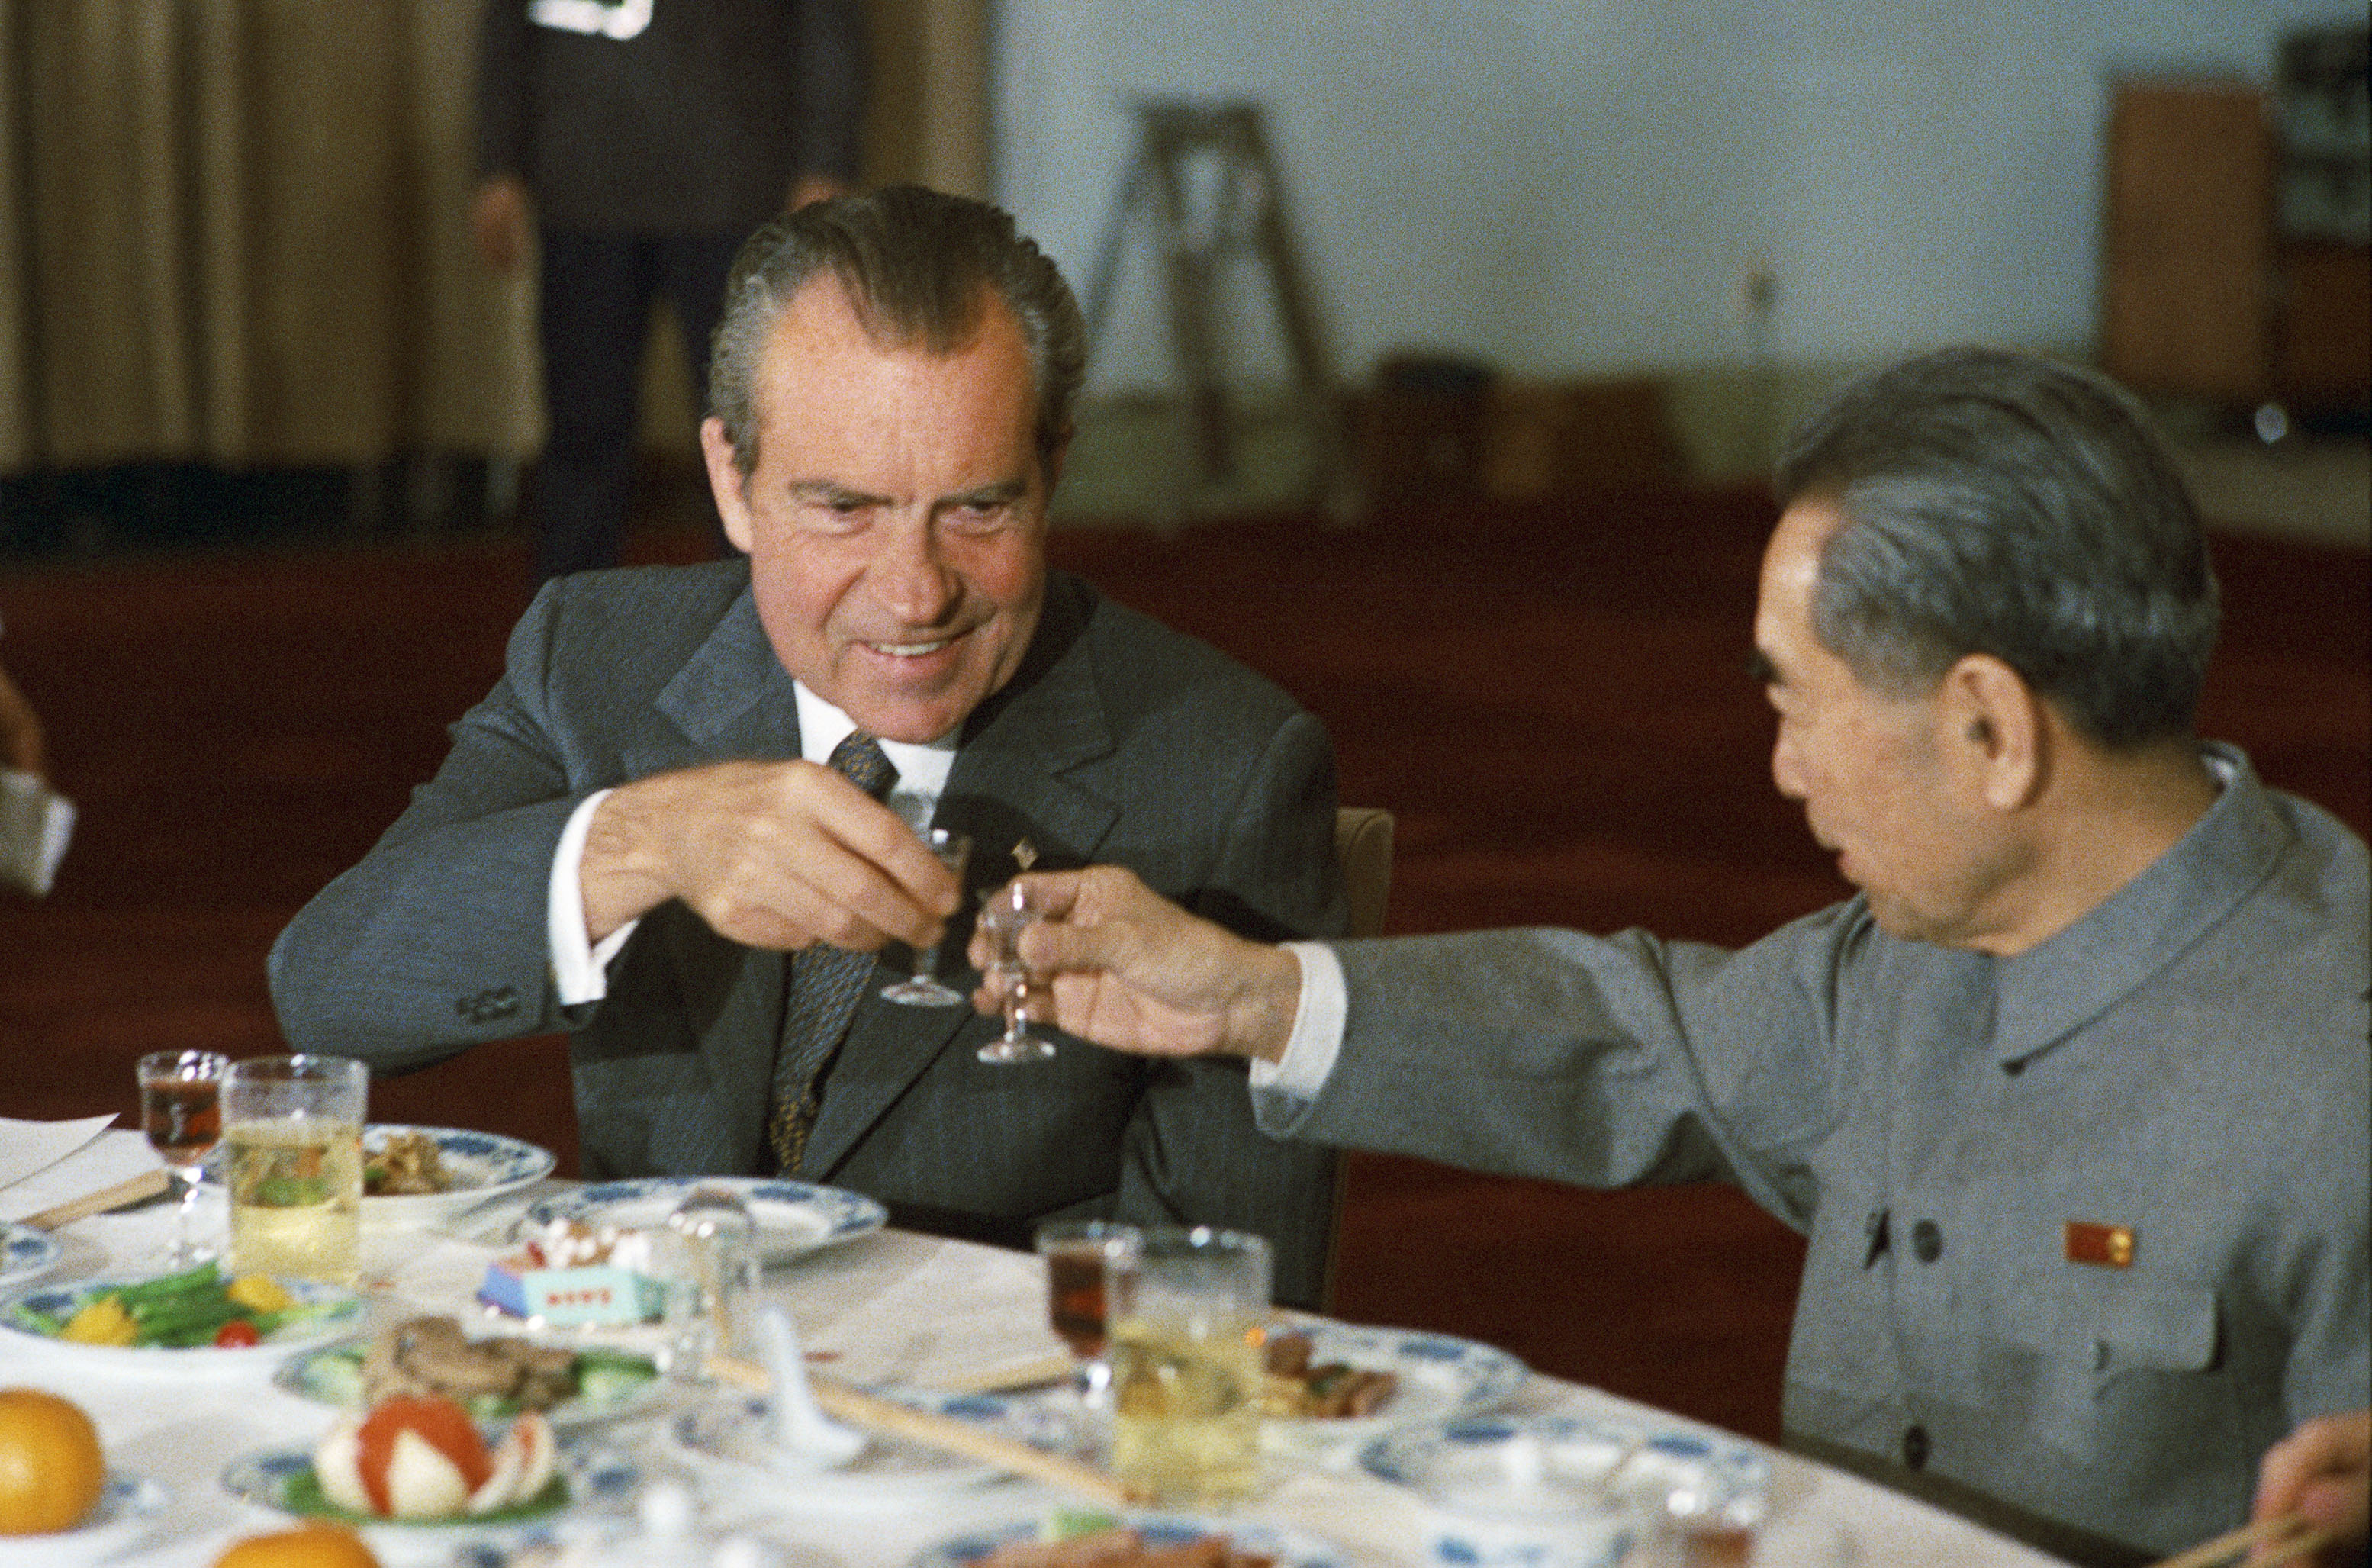 Iran Deal: Is Obama Channeling Nixon?